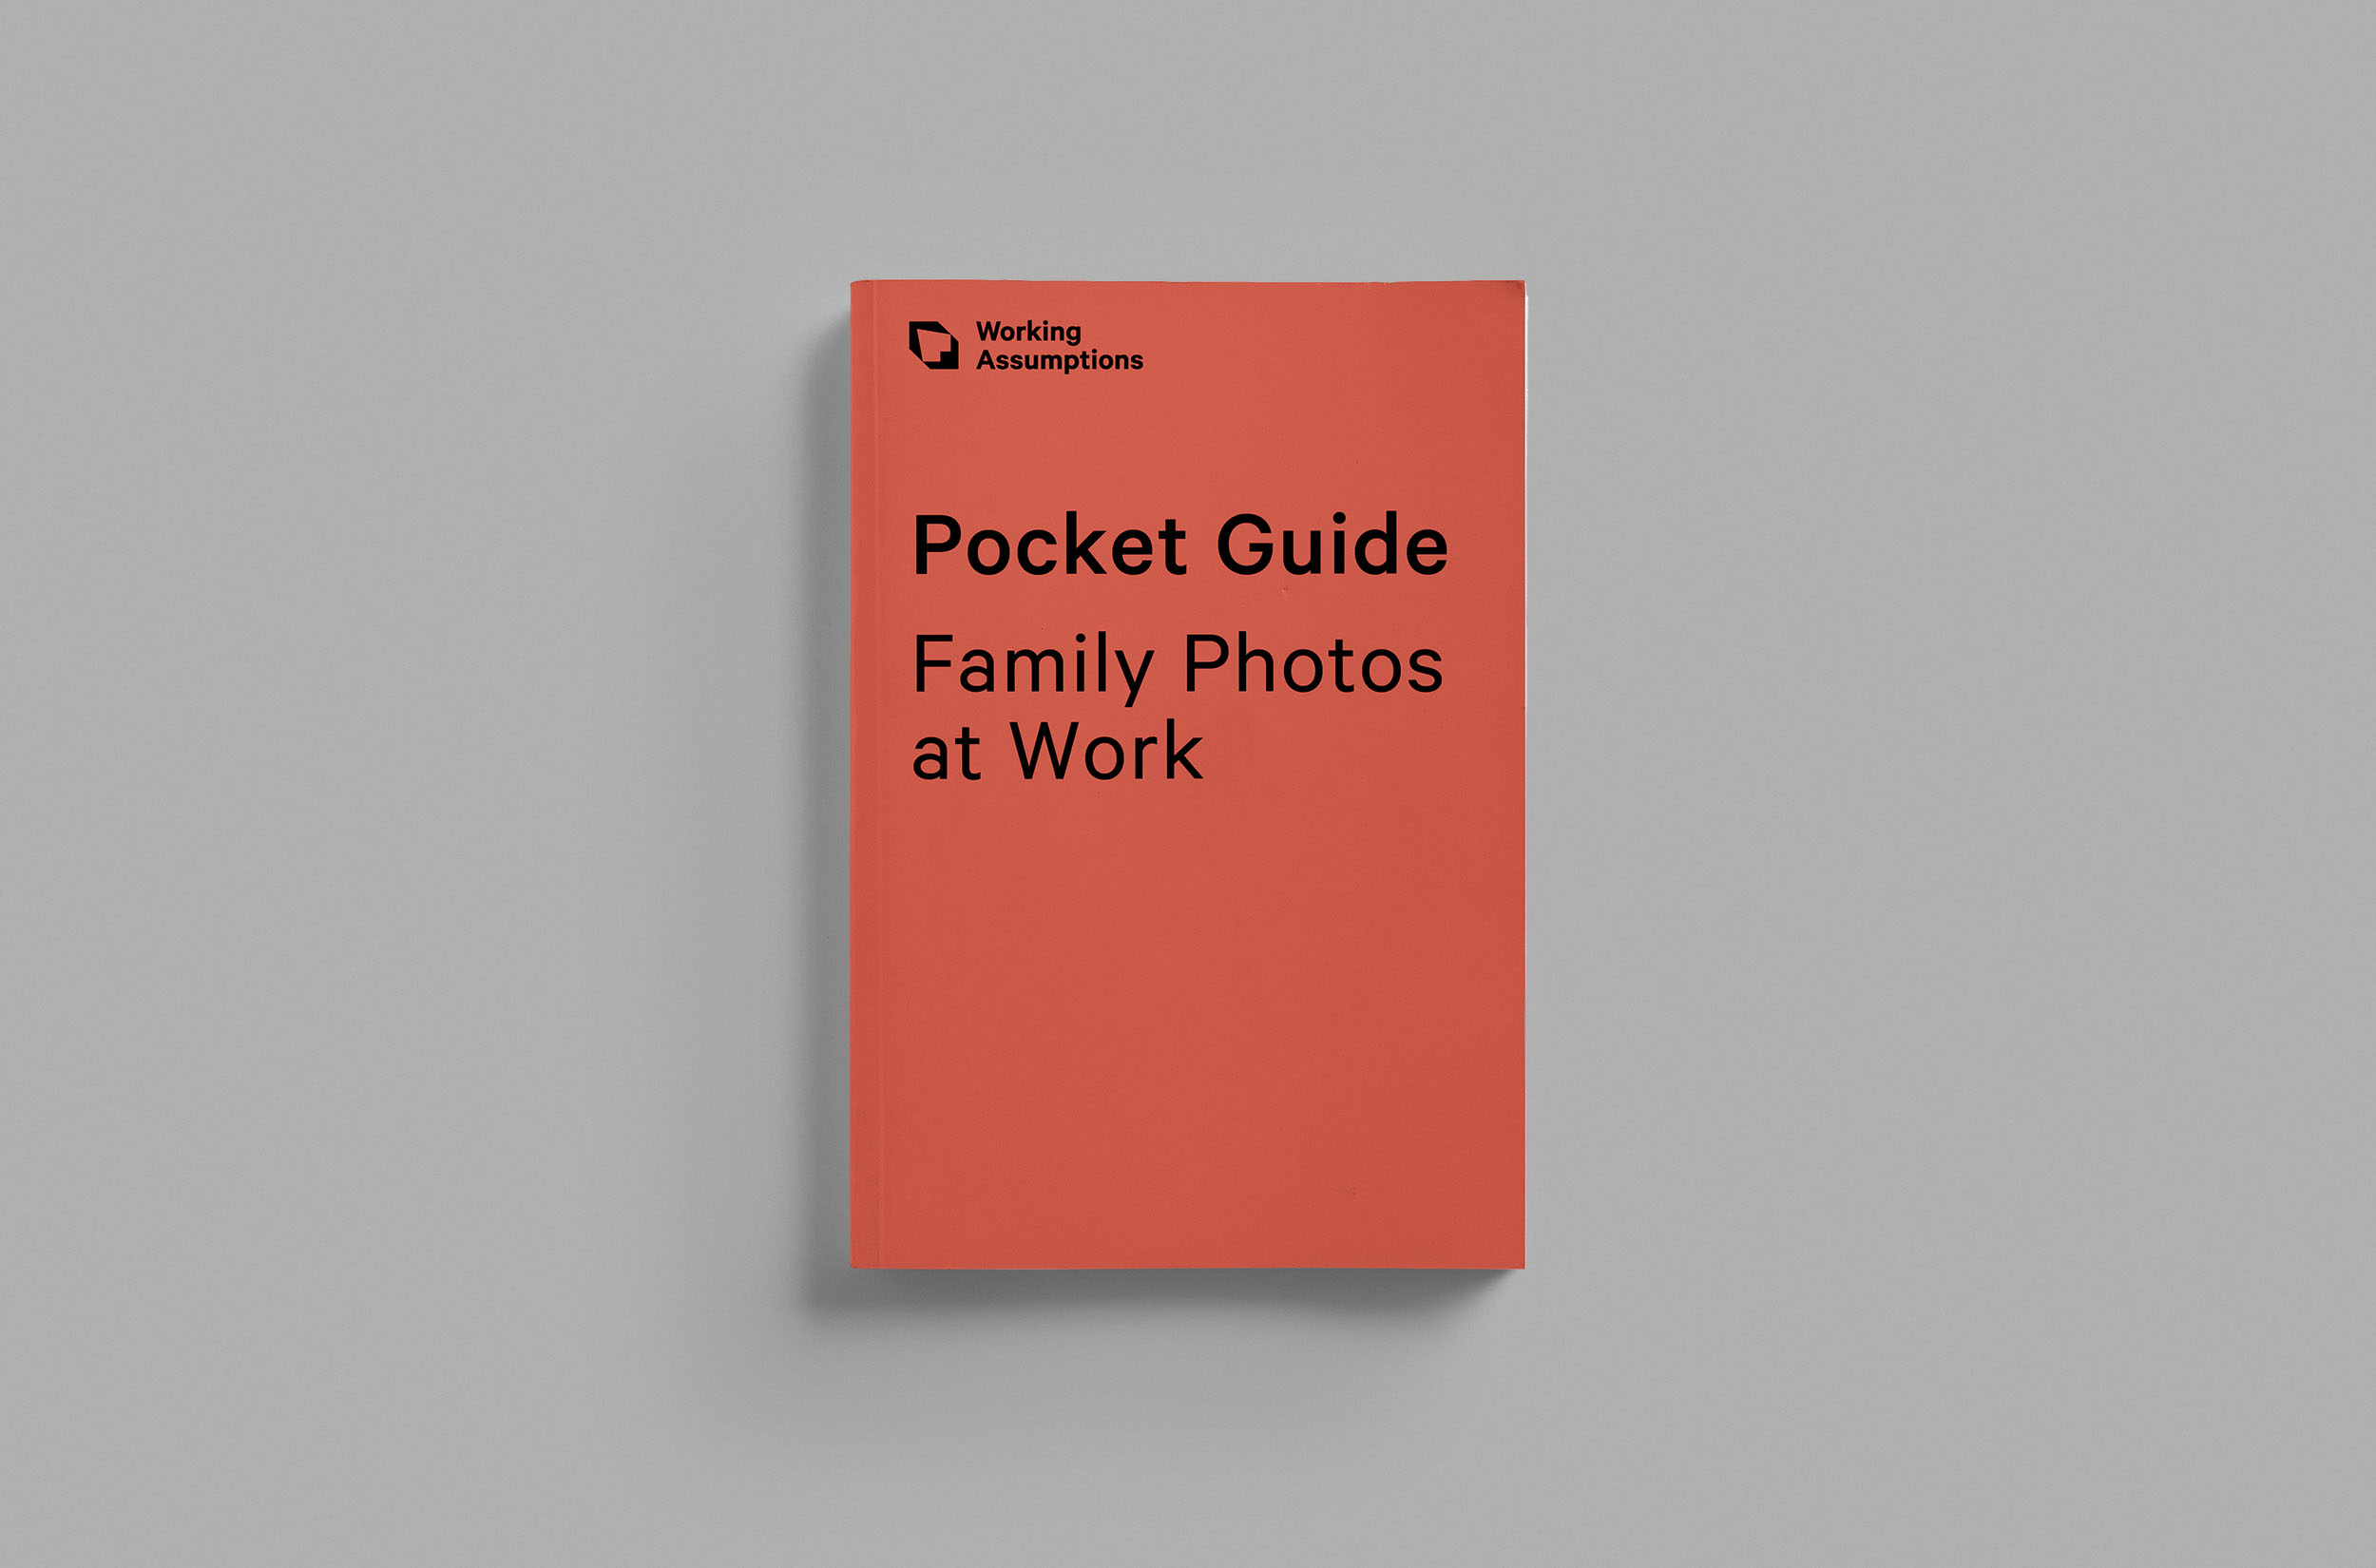 Image depicts a closed book entitled Pocket Guide: Family Photos at Work.